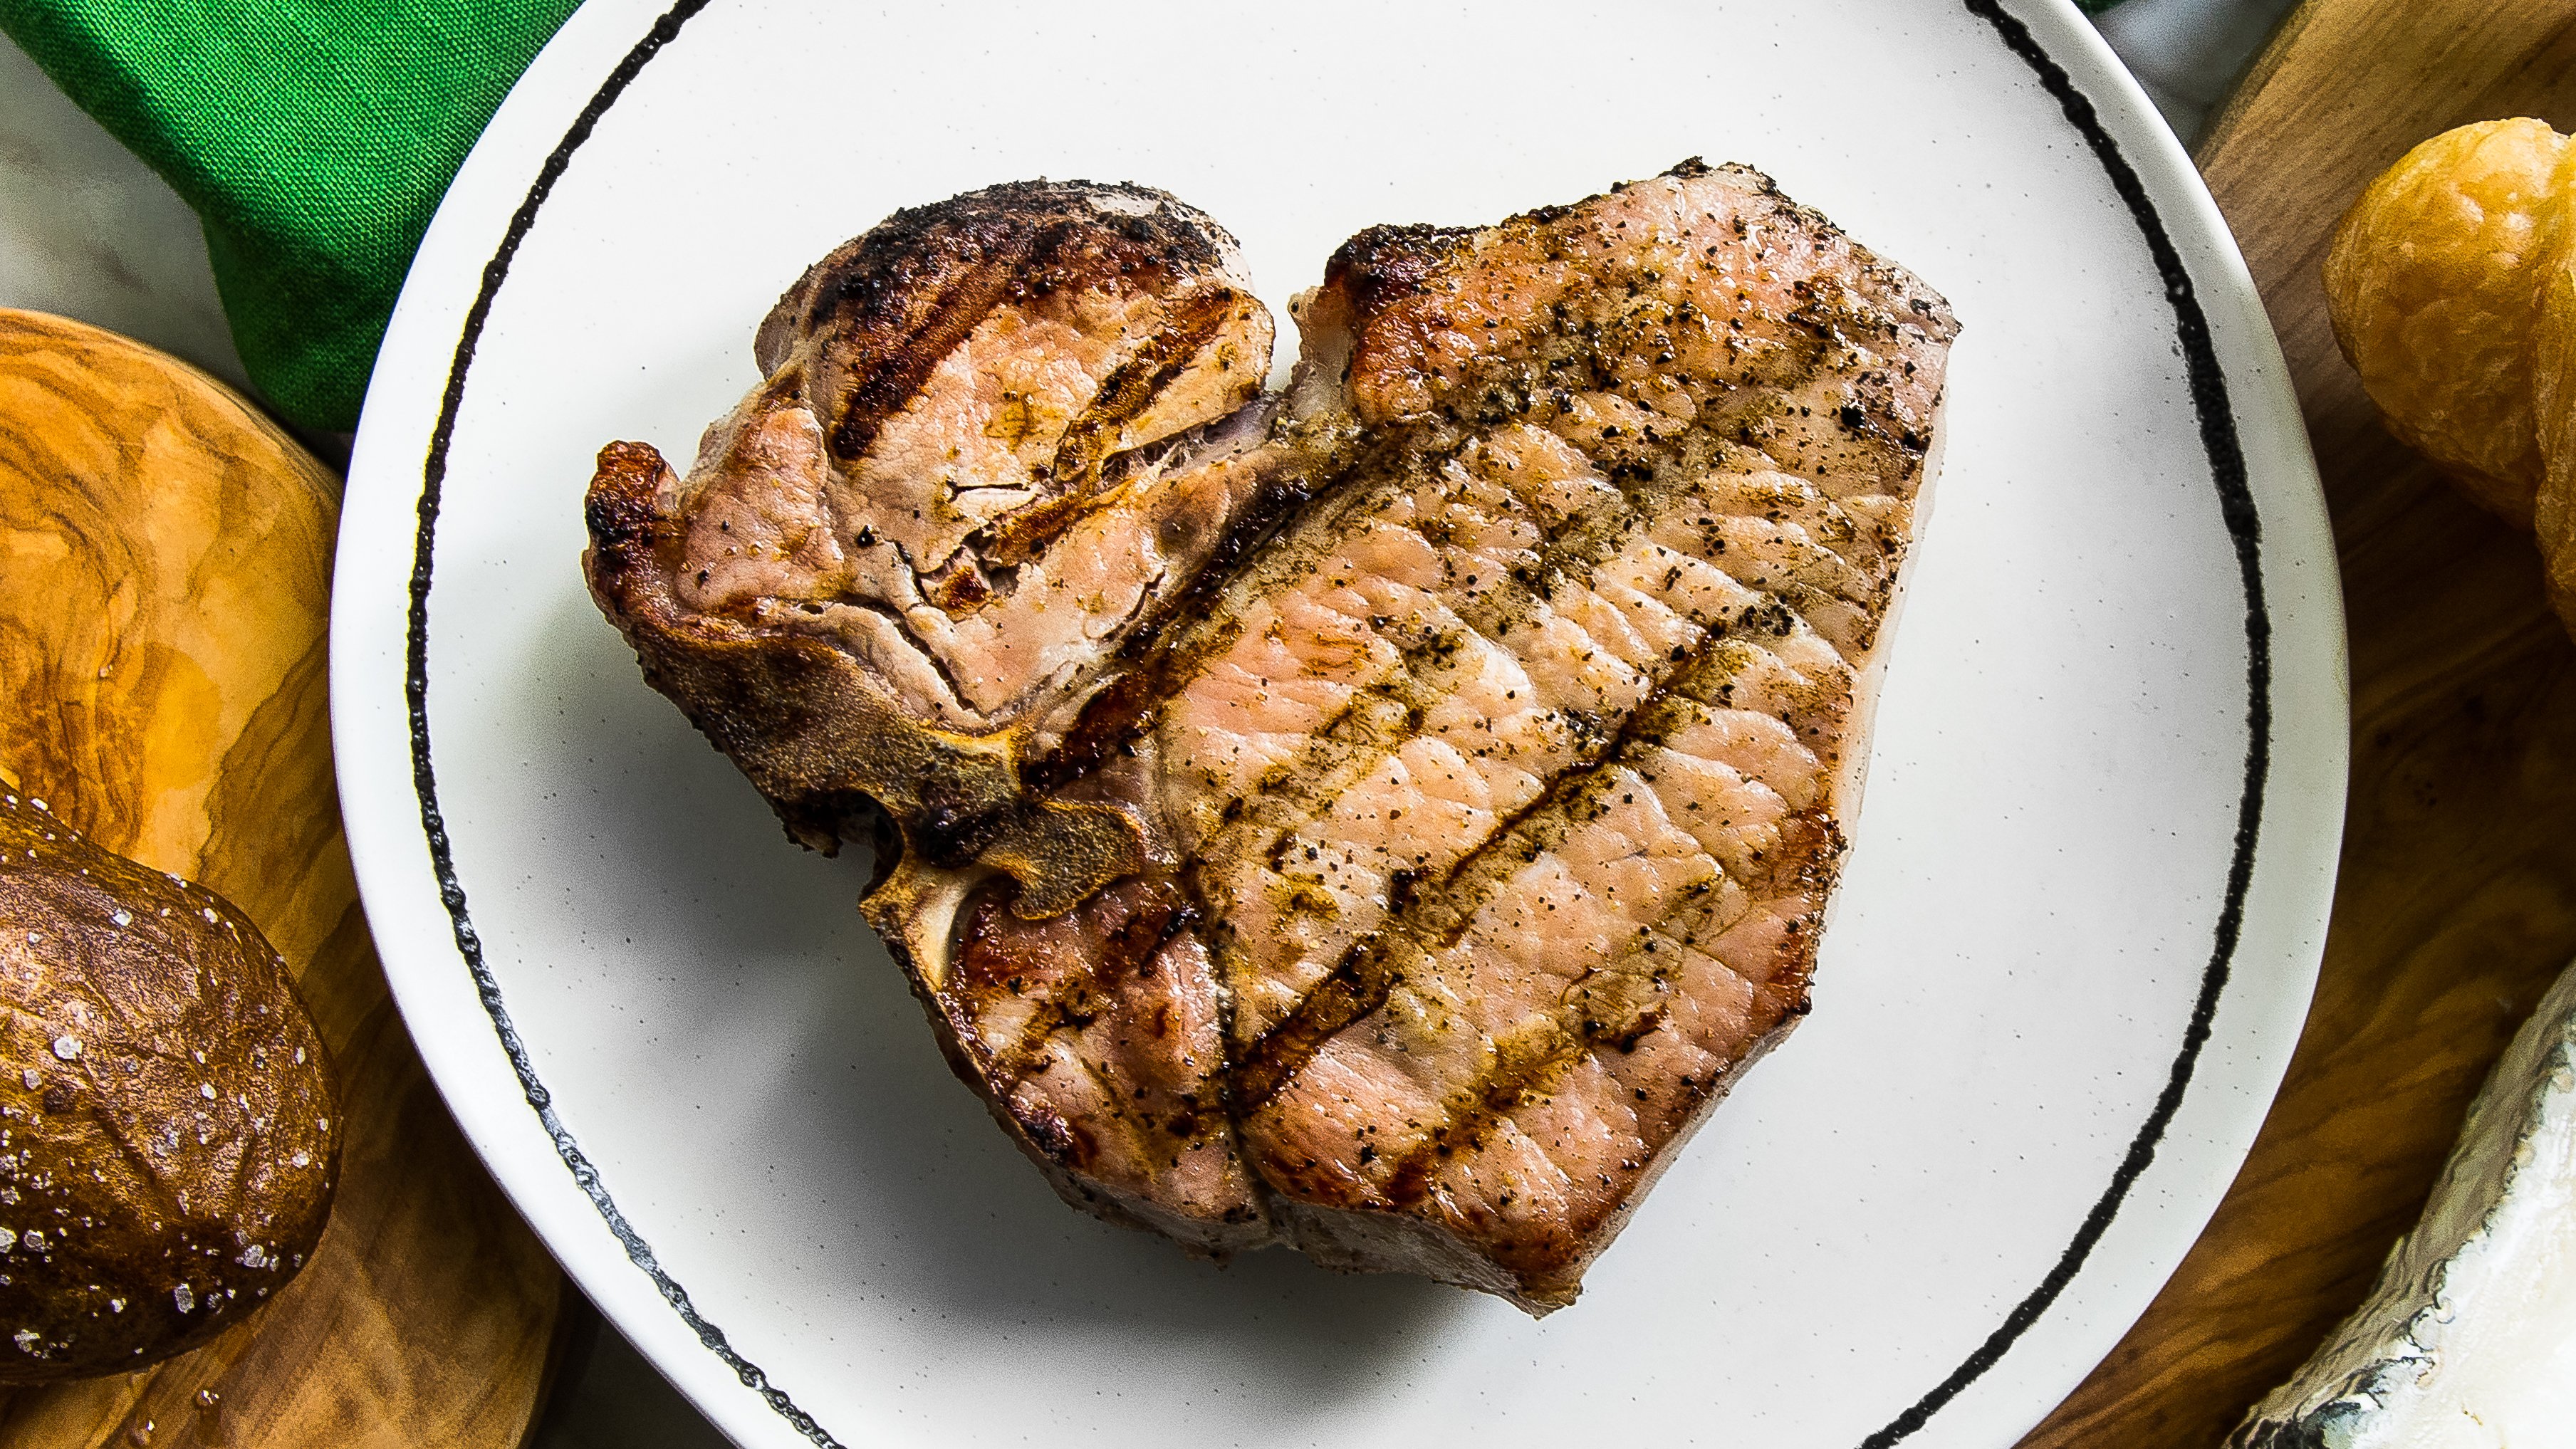 June - Grilled Peppery Pork Chops 16x9 (1 of 1)